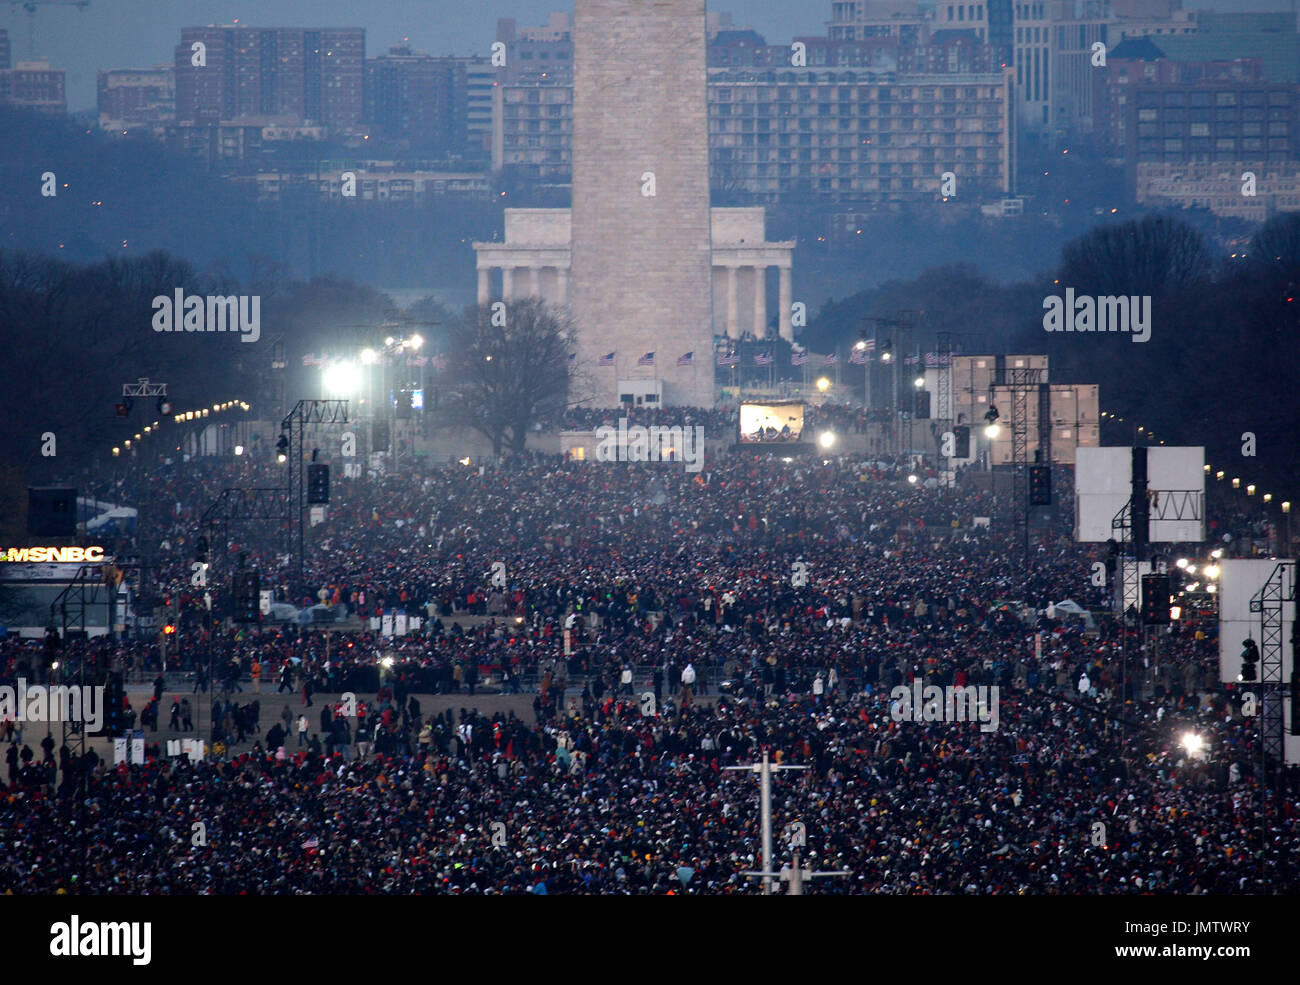 Washington, DC - January 20, 2009 -- People fill the National Mall in the early morning hours of Tuesday, January 20, 2009, as they wait for the Inauguration of Barack Obama as the 44th President of the United States..Credit: Scott Andrews - Pool via CNP Stock Photo